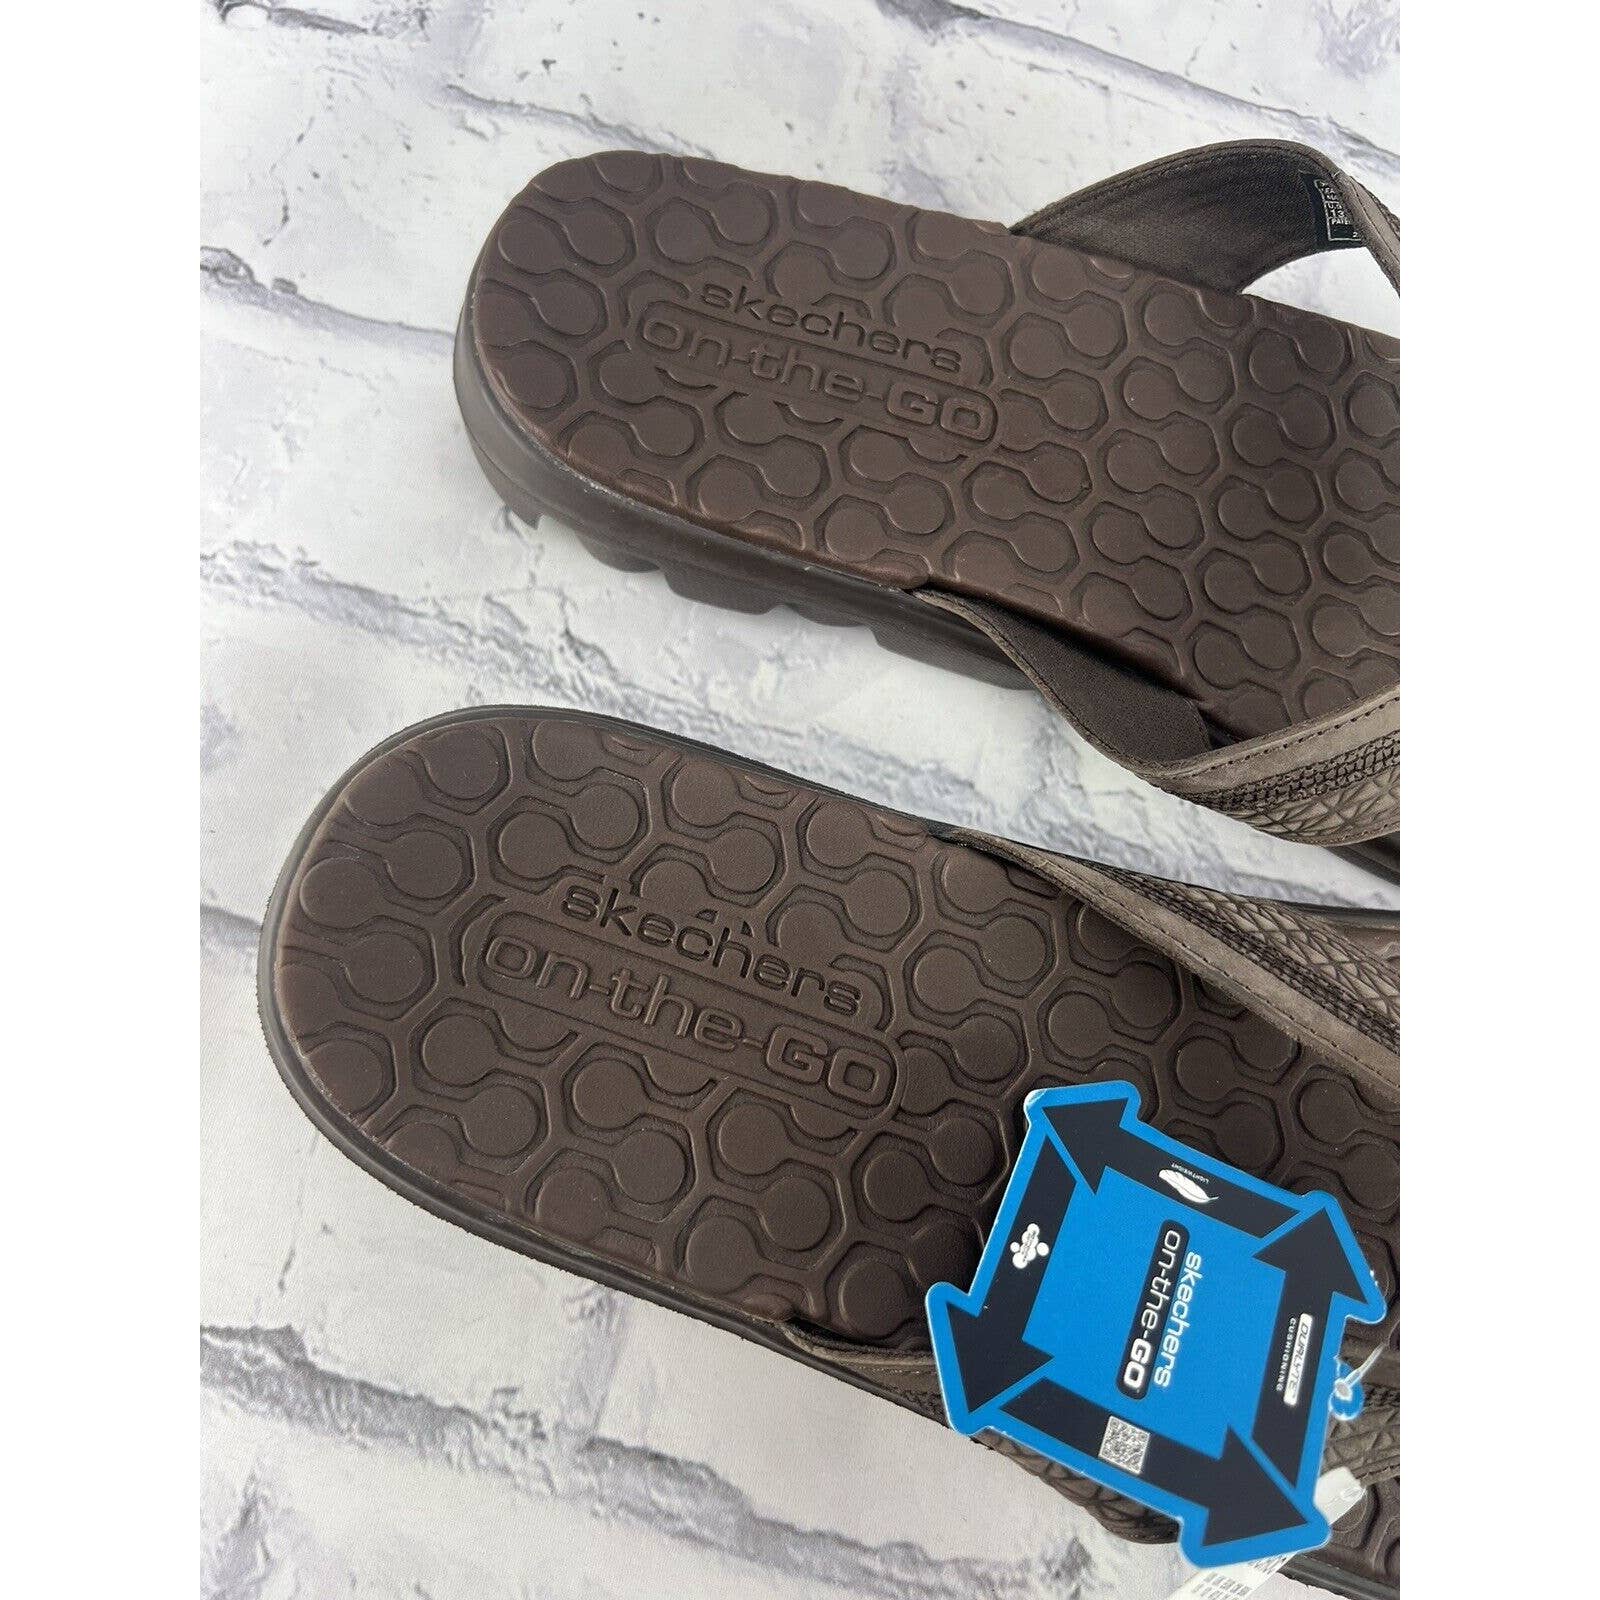 Skechers On The Go Flip Flops Men’s Size 13 Chocolate Brown Casual Sandal